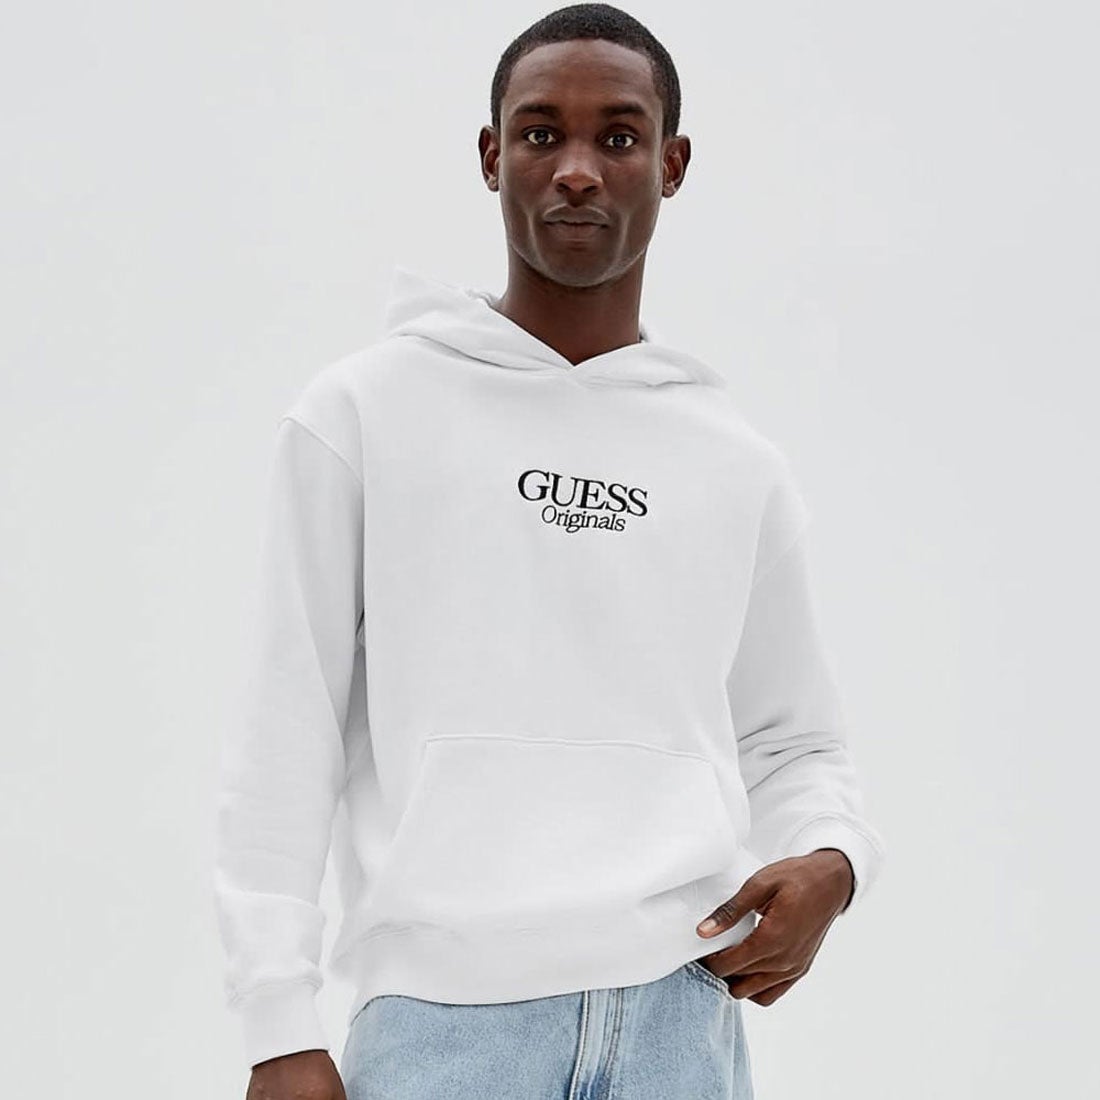 Guess Jeans ロゴフーディ - パーカー